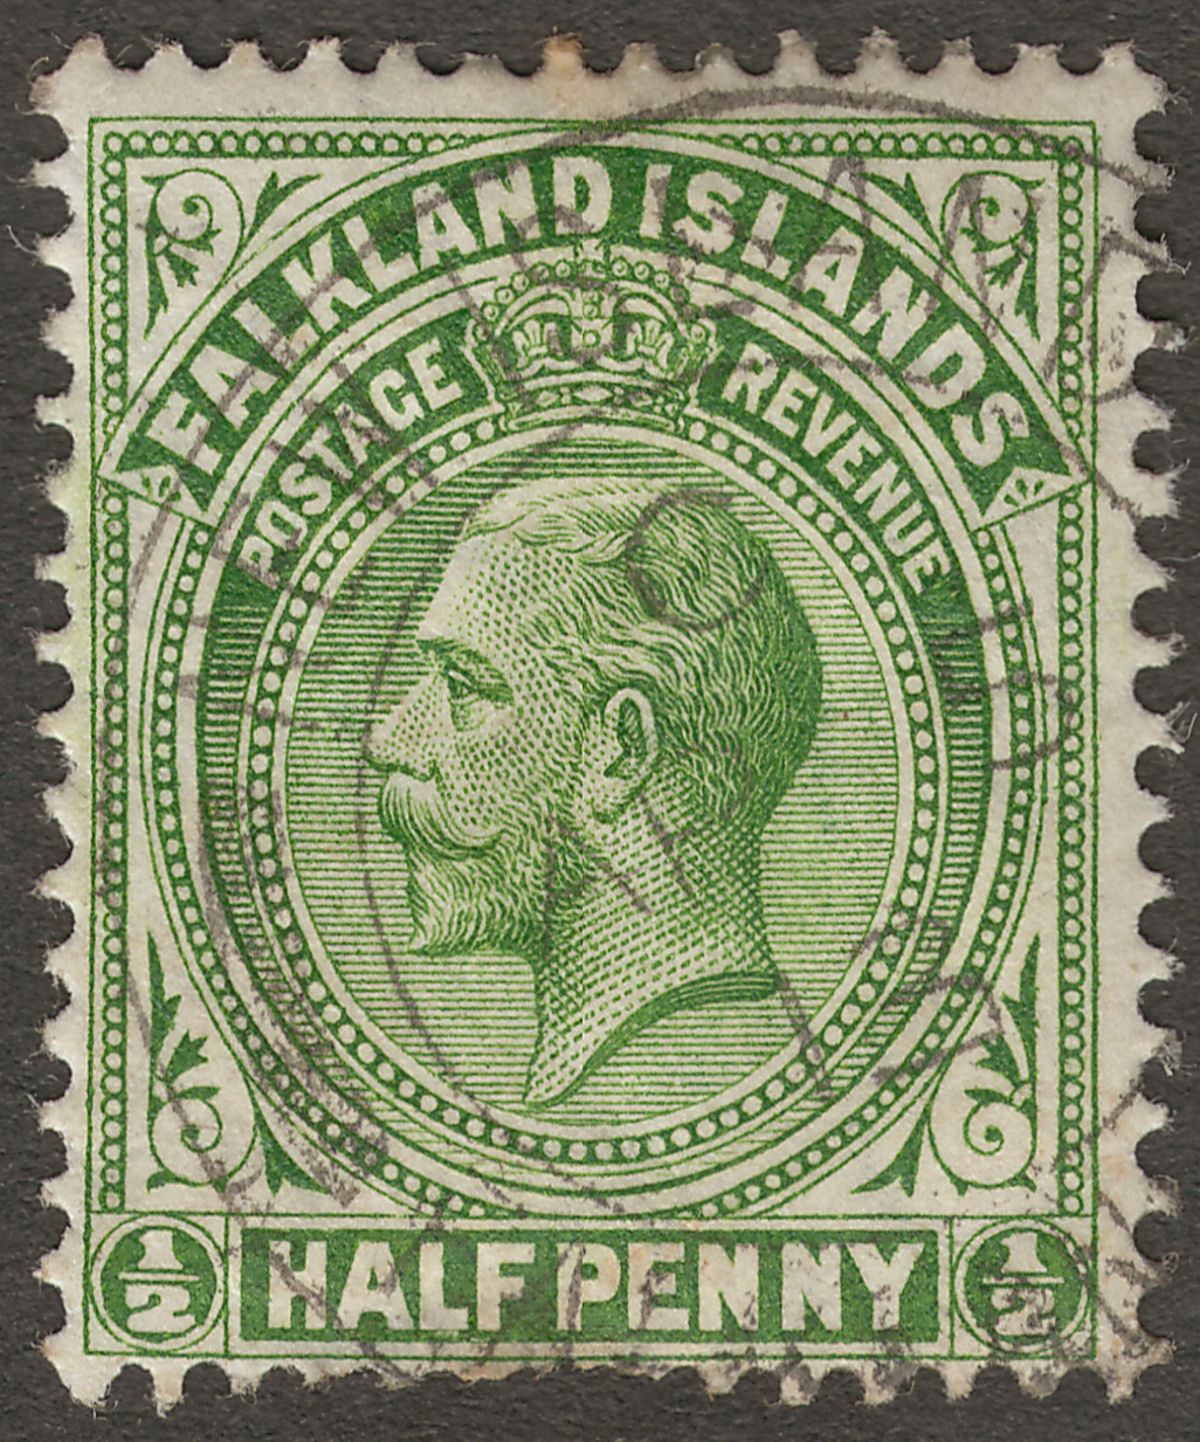 Falkland Islands 1913 KGV ½d Green Used with NEW ISLAND code C Postmark AP 5